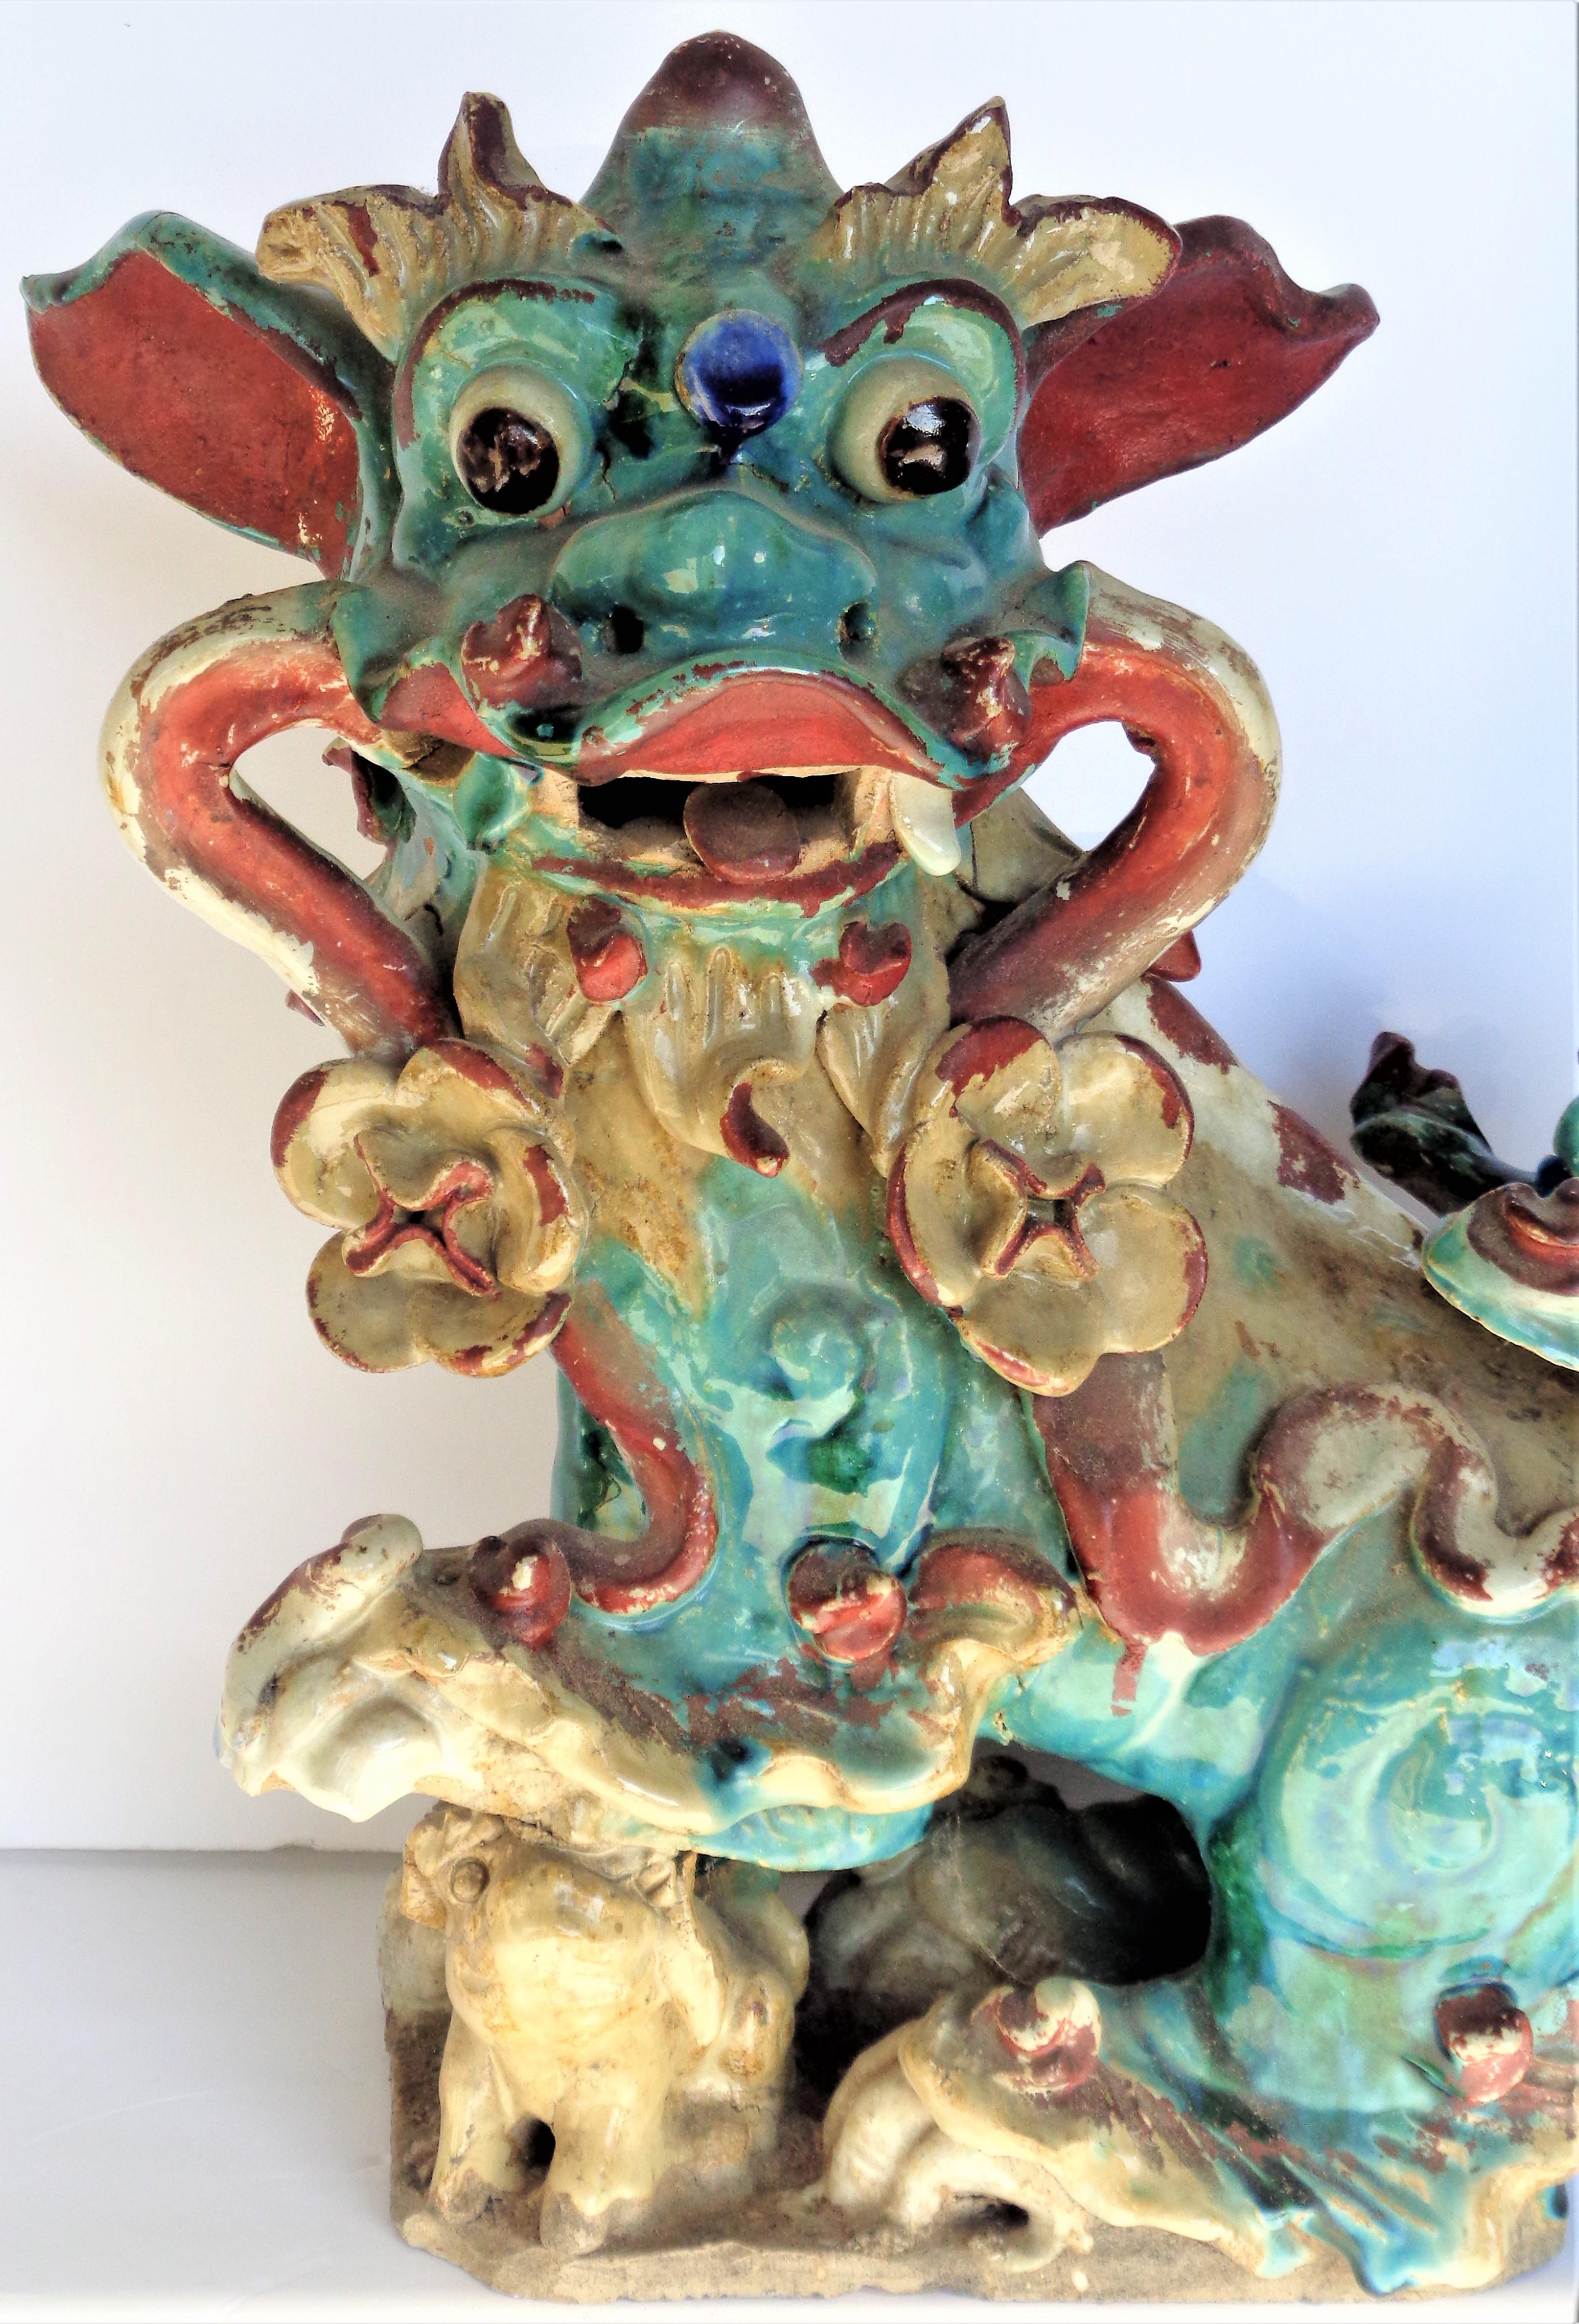 Early antique Chinese Sancai glaze stoneware foo dog roof tile. 
 We think this dates to the late Ming dynasty. Old and beautiful. Look at all pictures and read condition report in comment section.